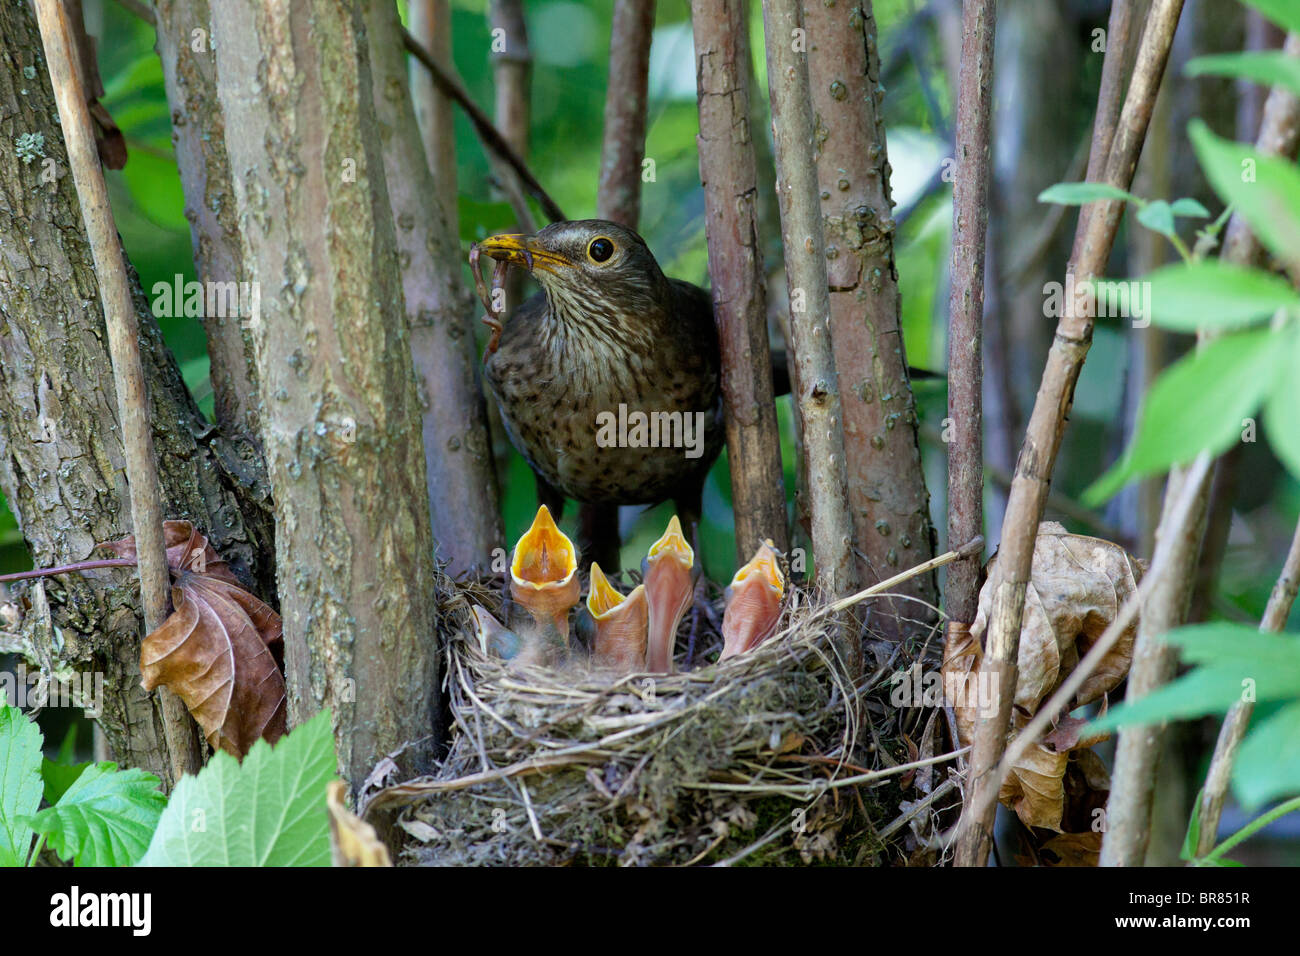 The Blackbird (Turdus merula) at a nest with hungry baby birds. Stock Photo